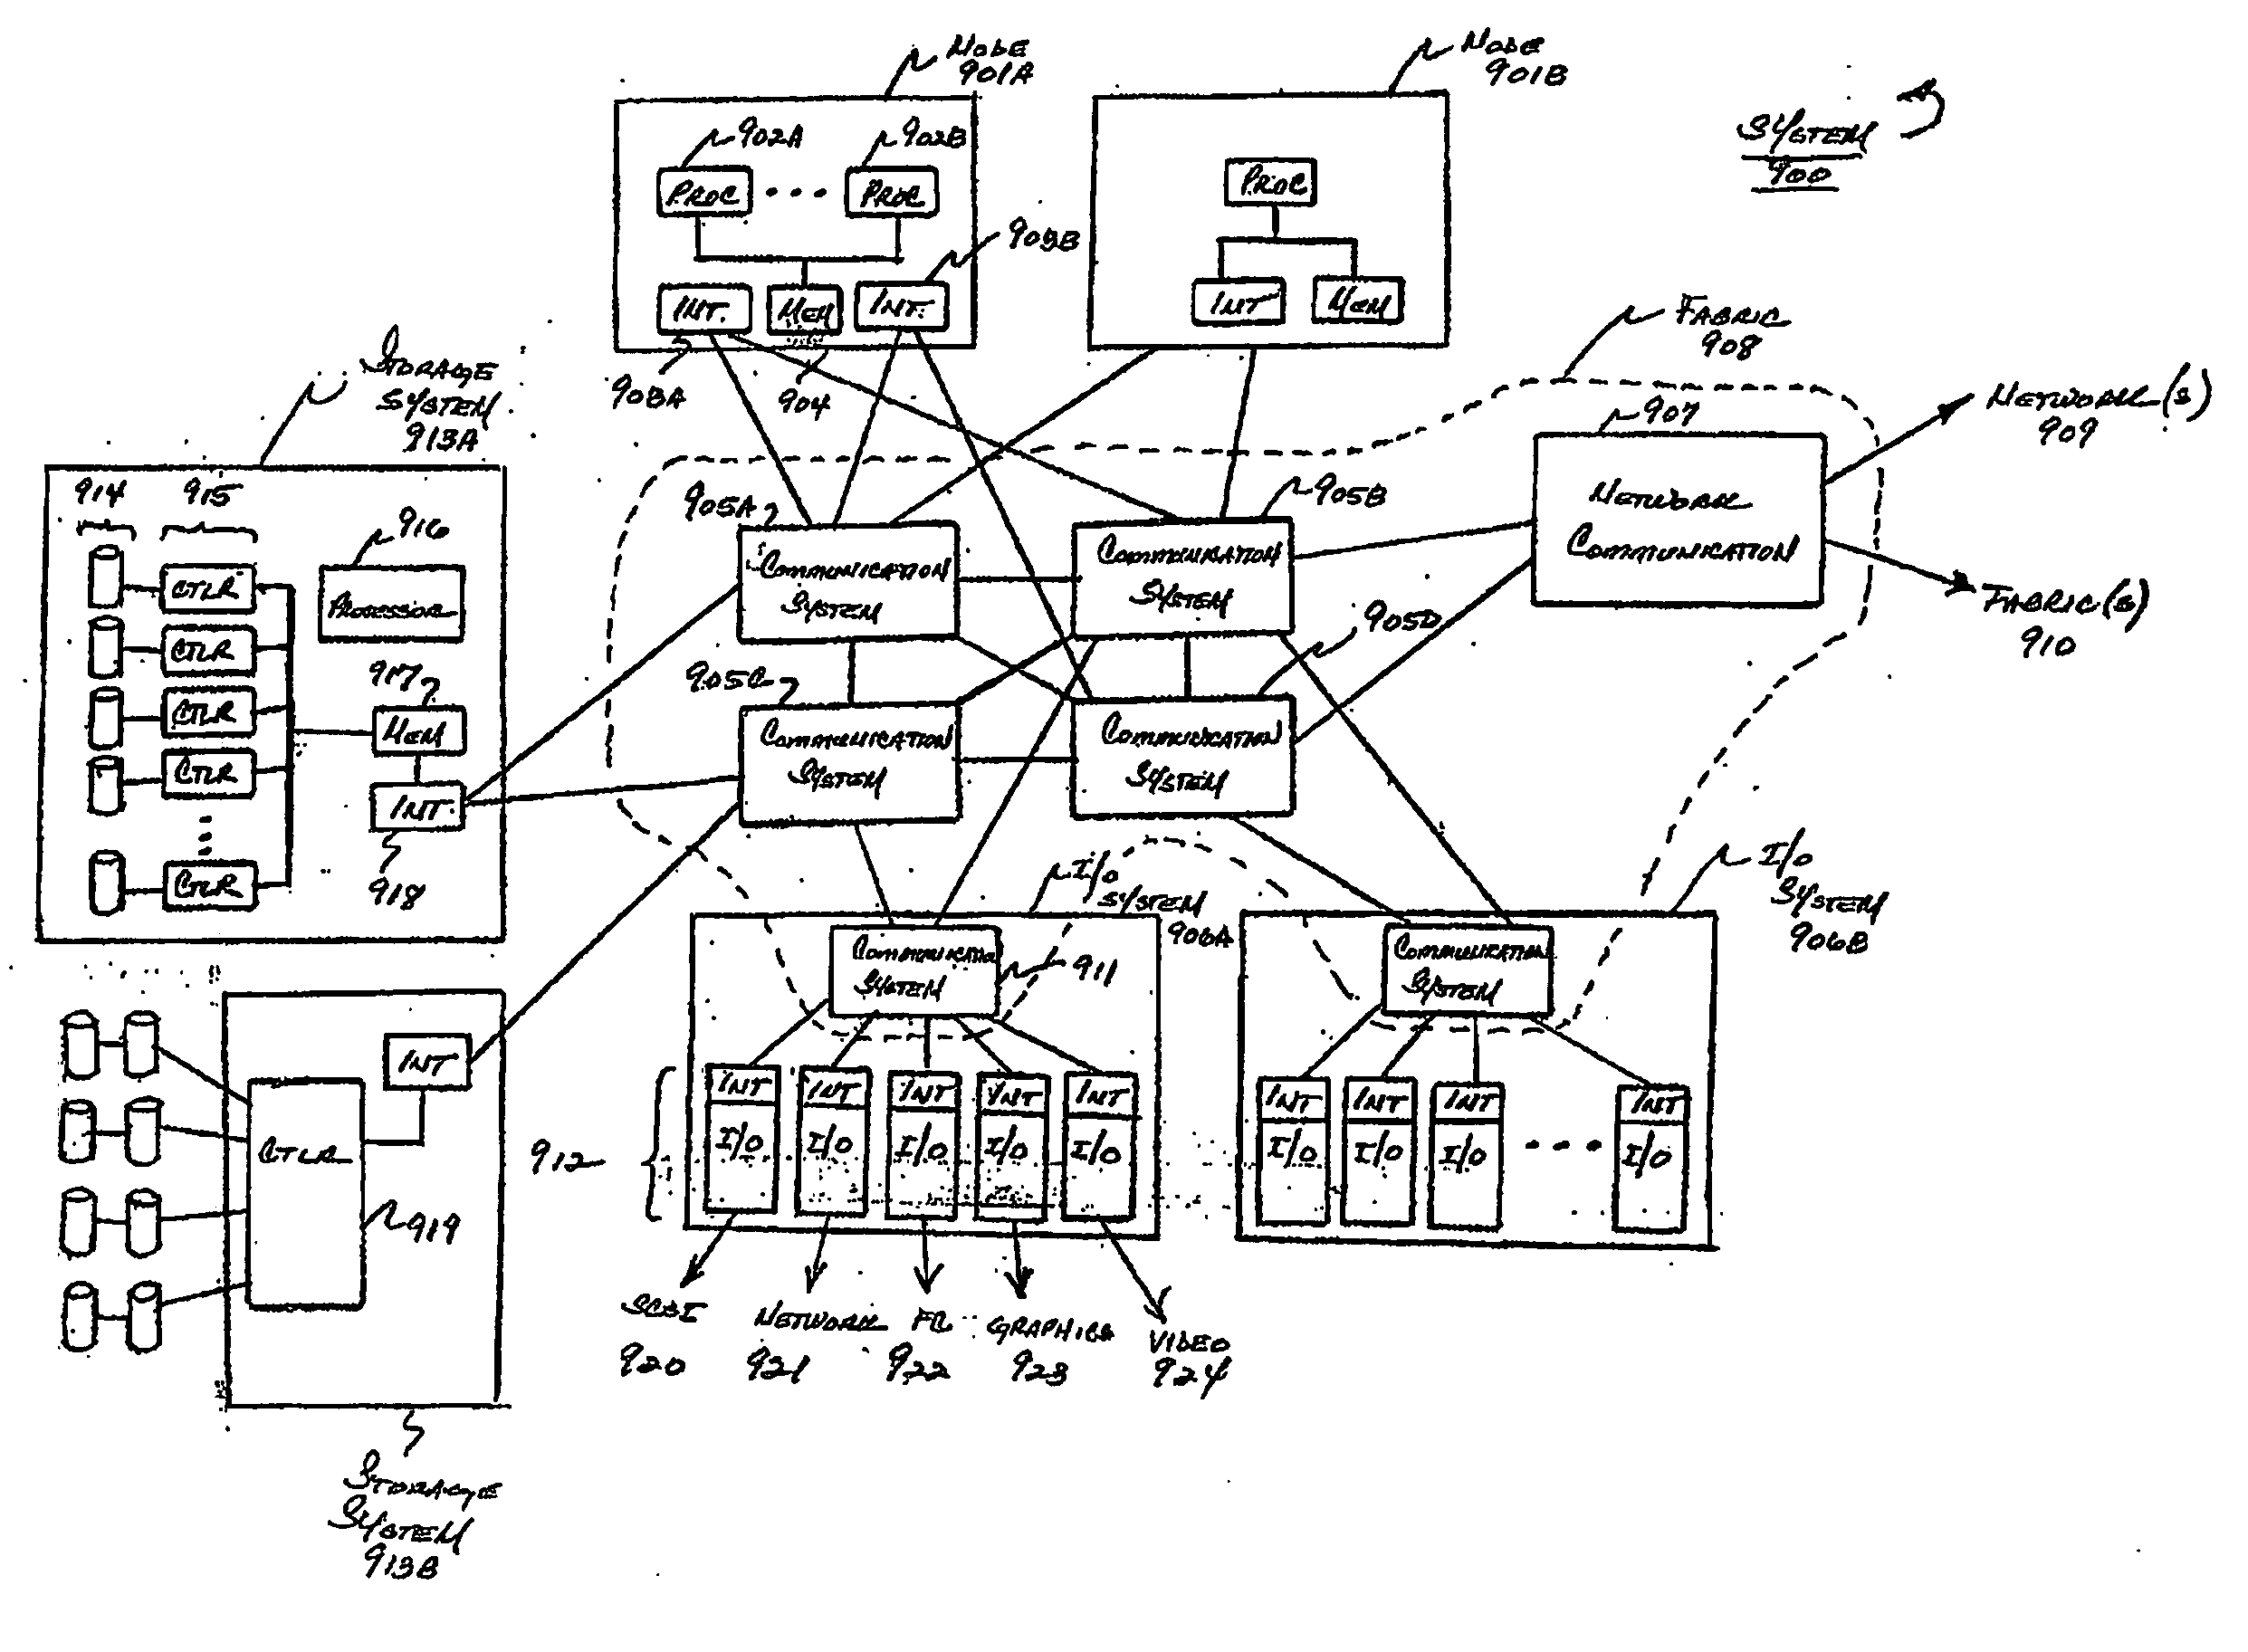 System and method for managing virtual servers